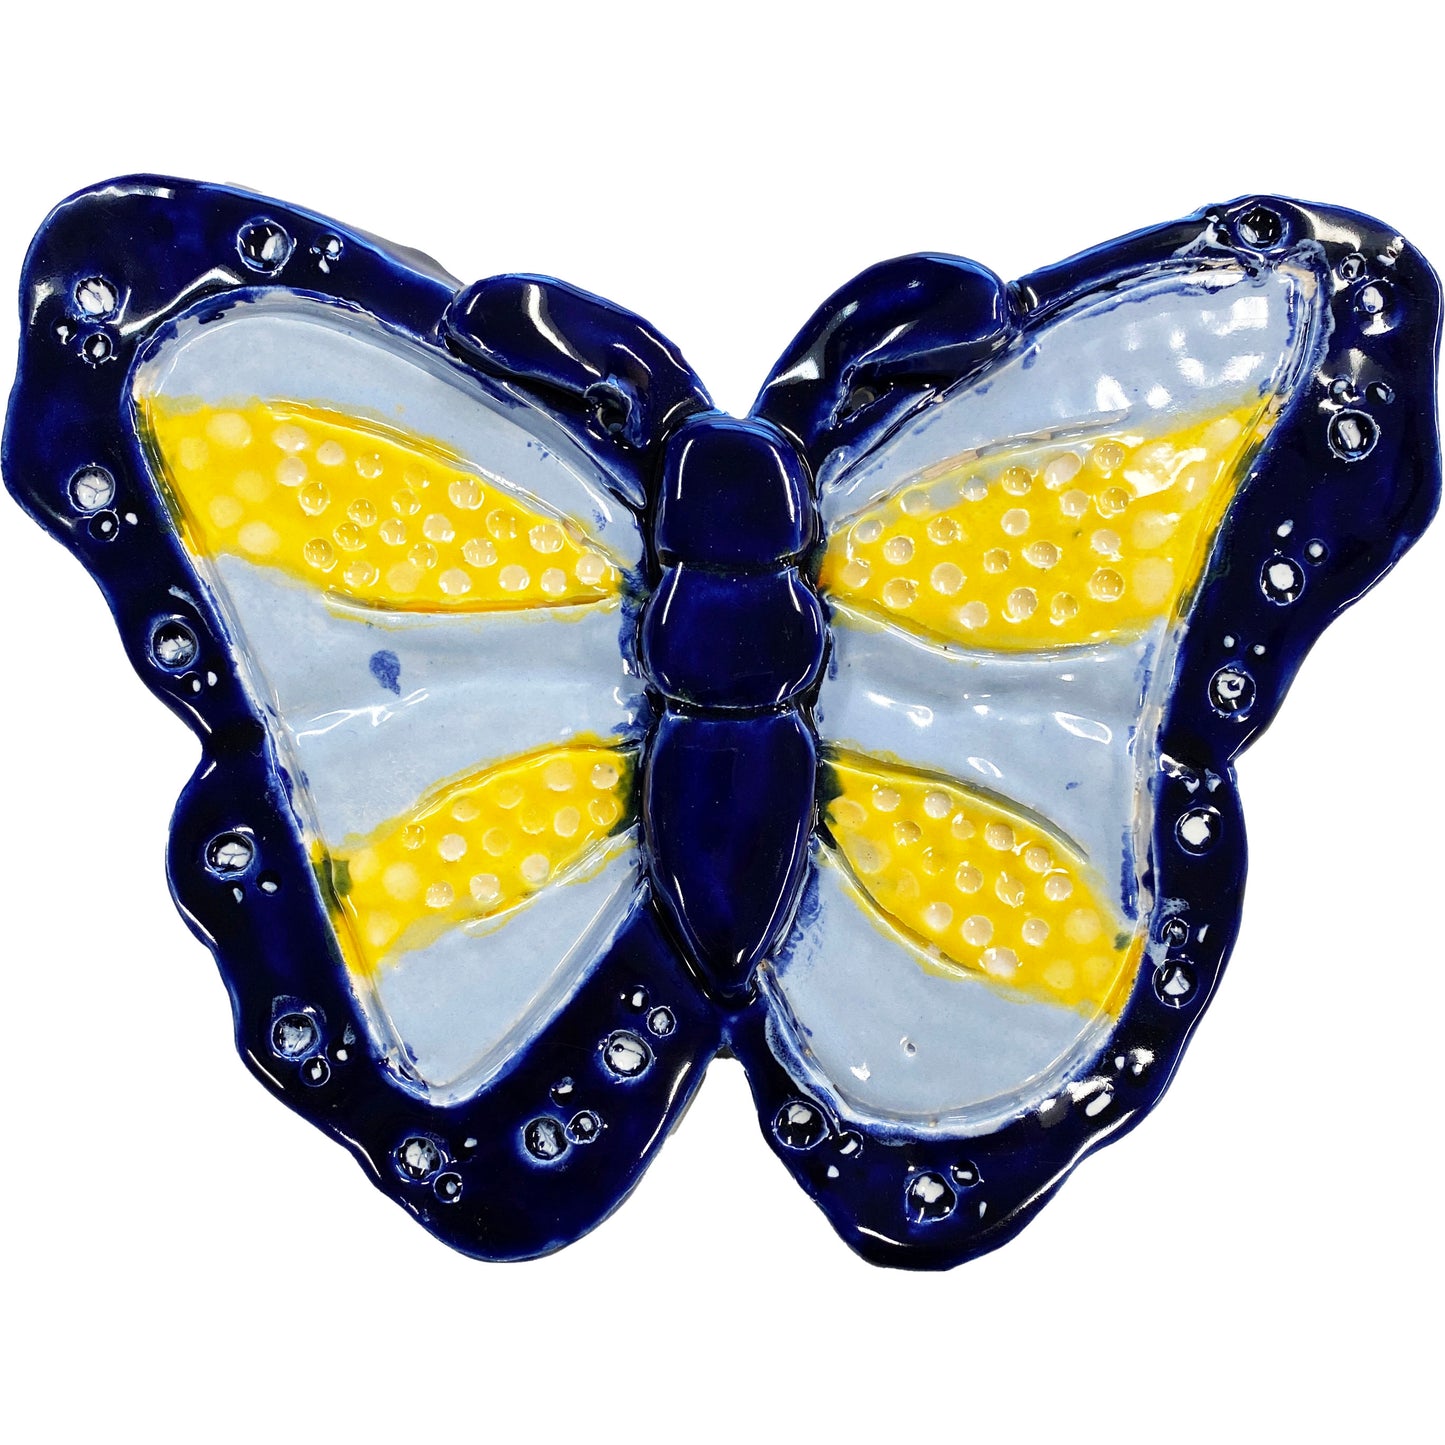 Ceramic Arts Handmade Clay Crafts Butterfly Glazed 8-inch x 6-inch by Lisa Uptain